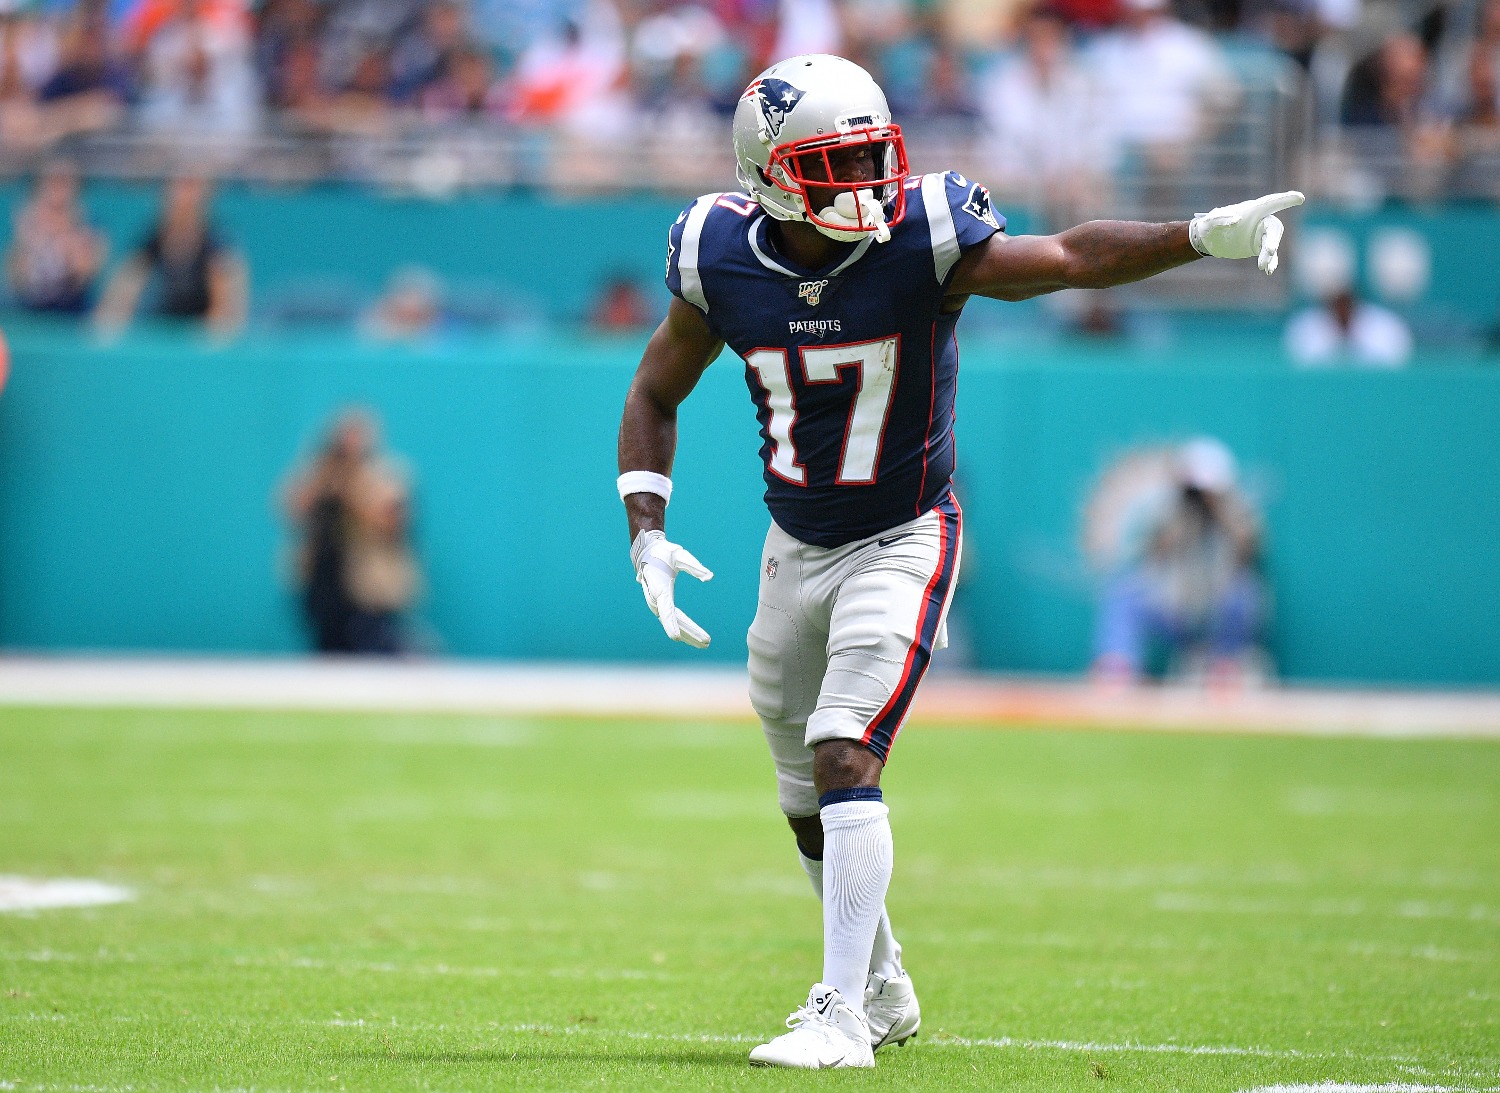 With Deshaun Watson signed to a $160 million deal, the Houston Texans need to sign Antonio Brown to give Watson a Super Bowl-caliber weapon.